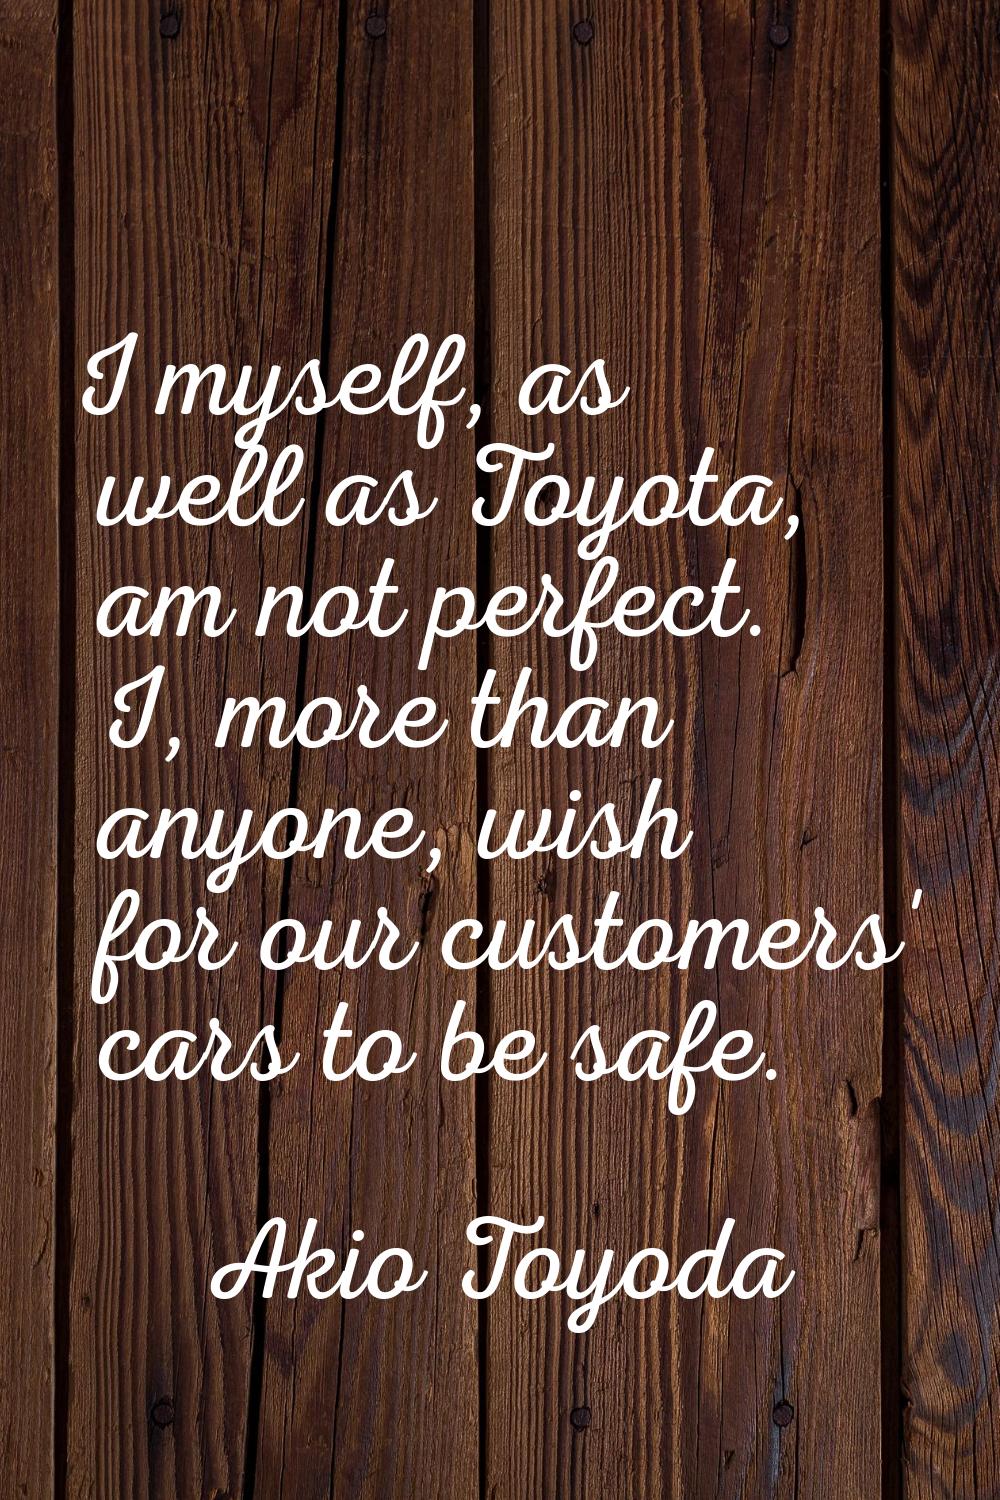 I myself, as well as Toyota, am not perfect. I, more than anyone, wish for our customers' cars to b